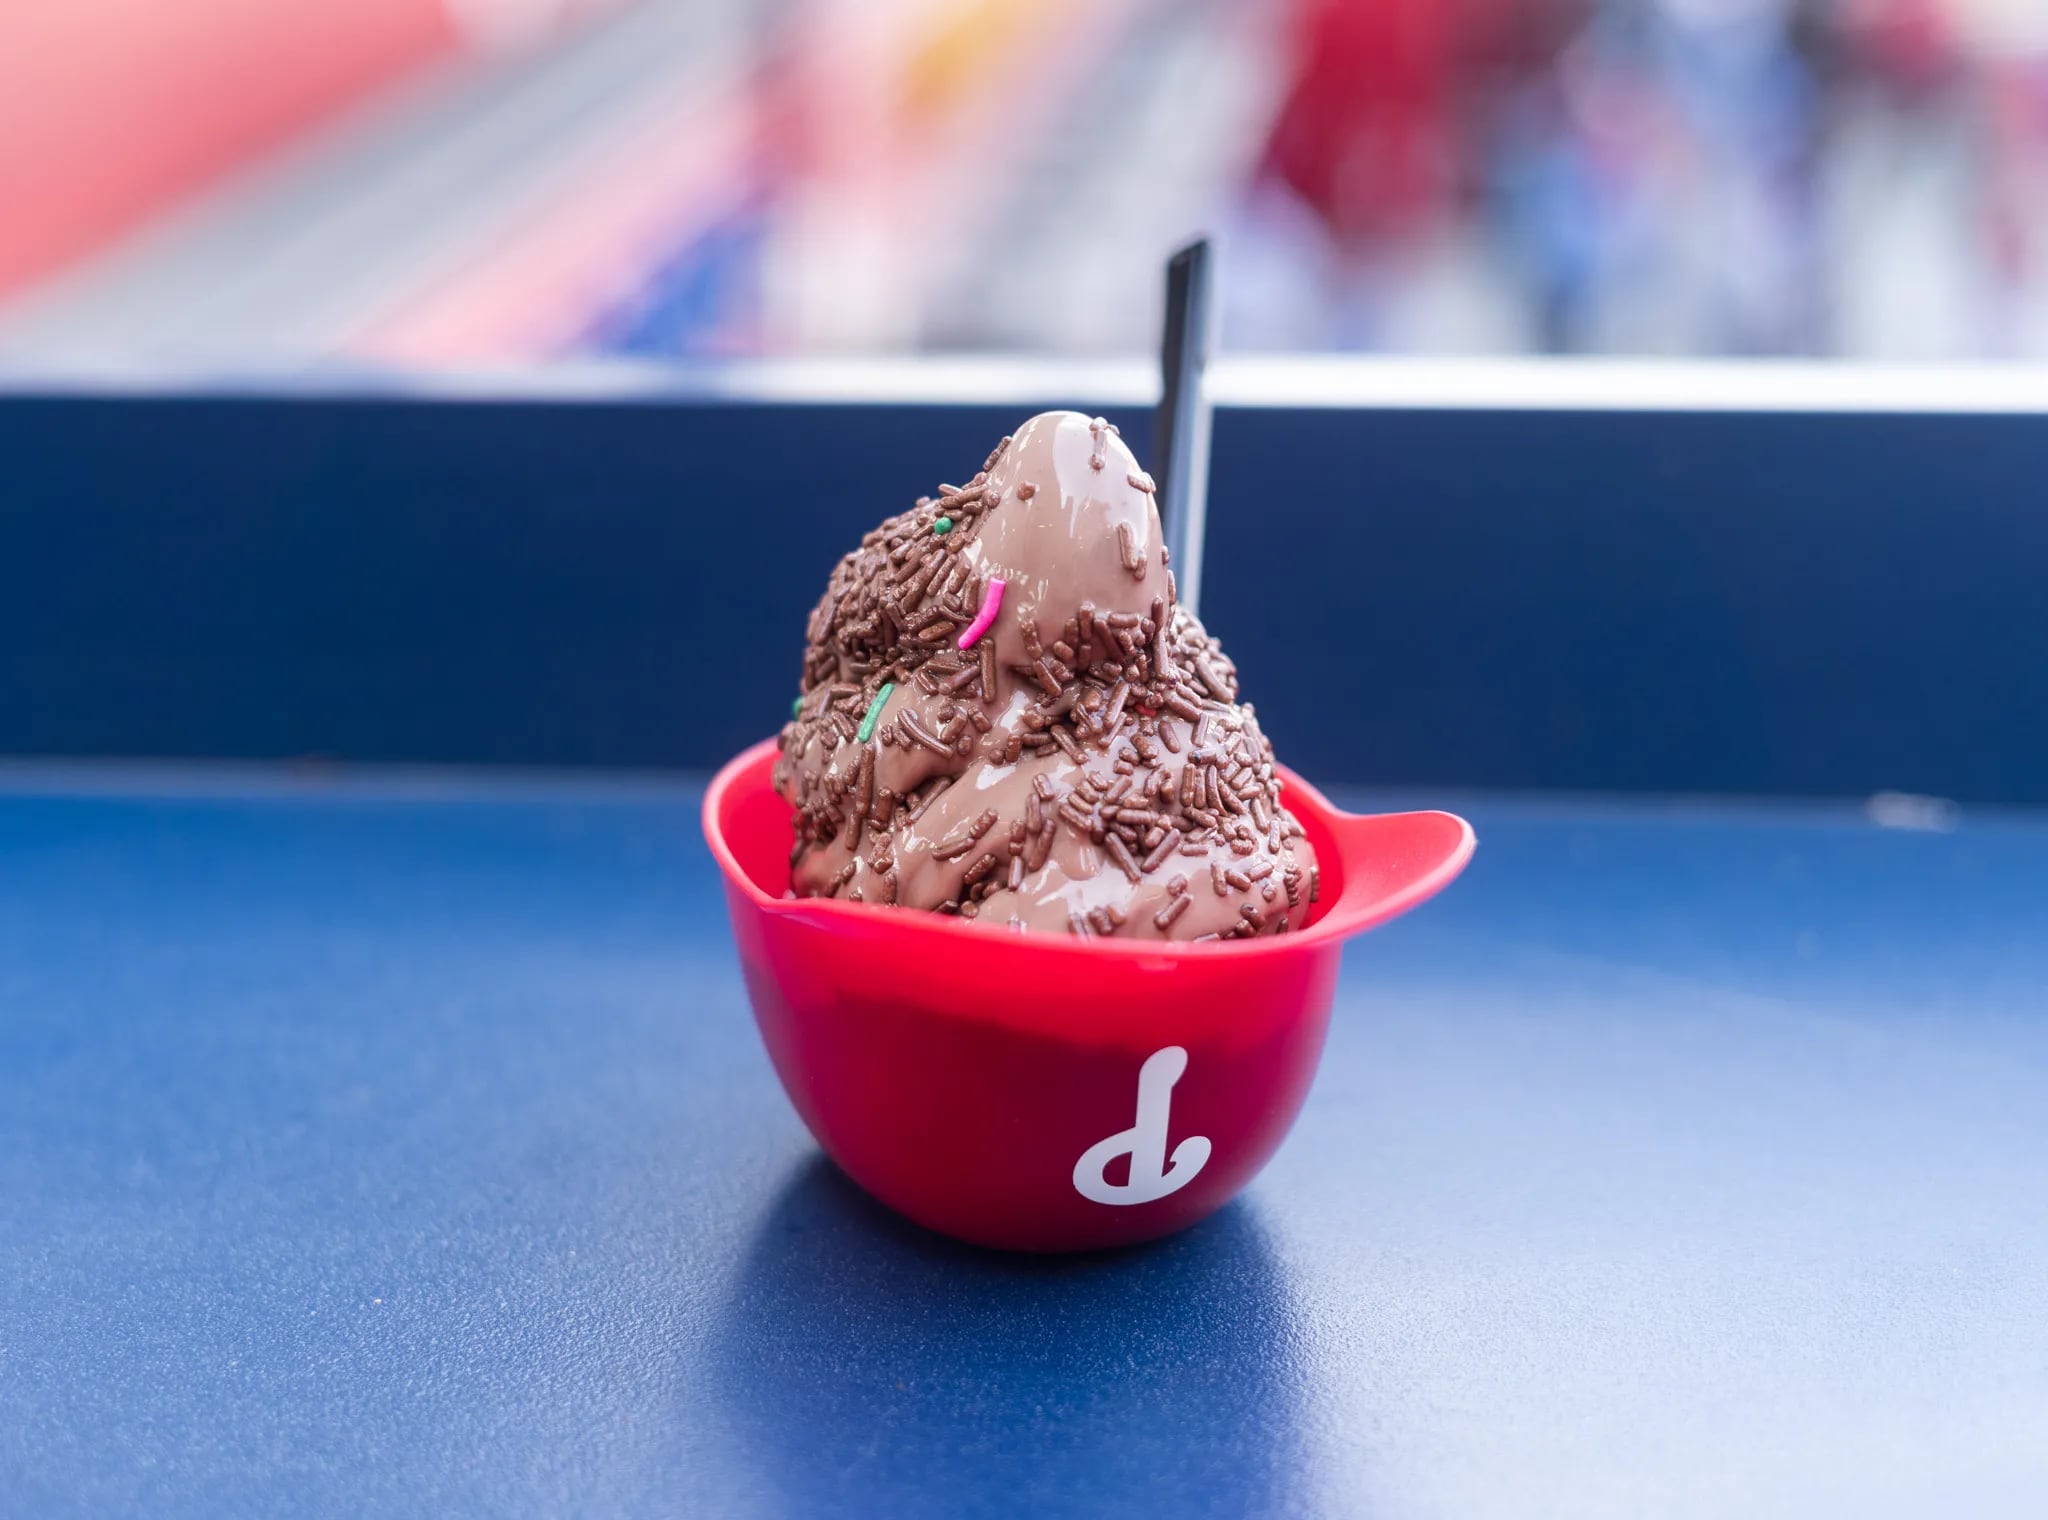 Chocolate ice cream and sprinkles from Old City Creamery at Citizens Bank Park.